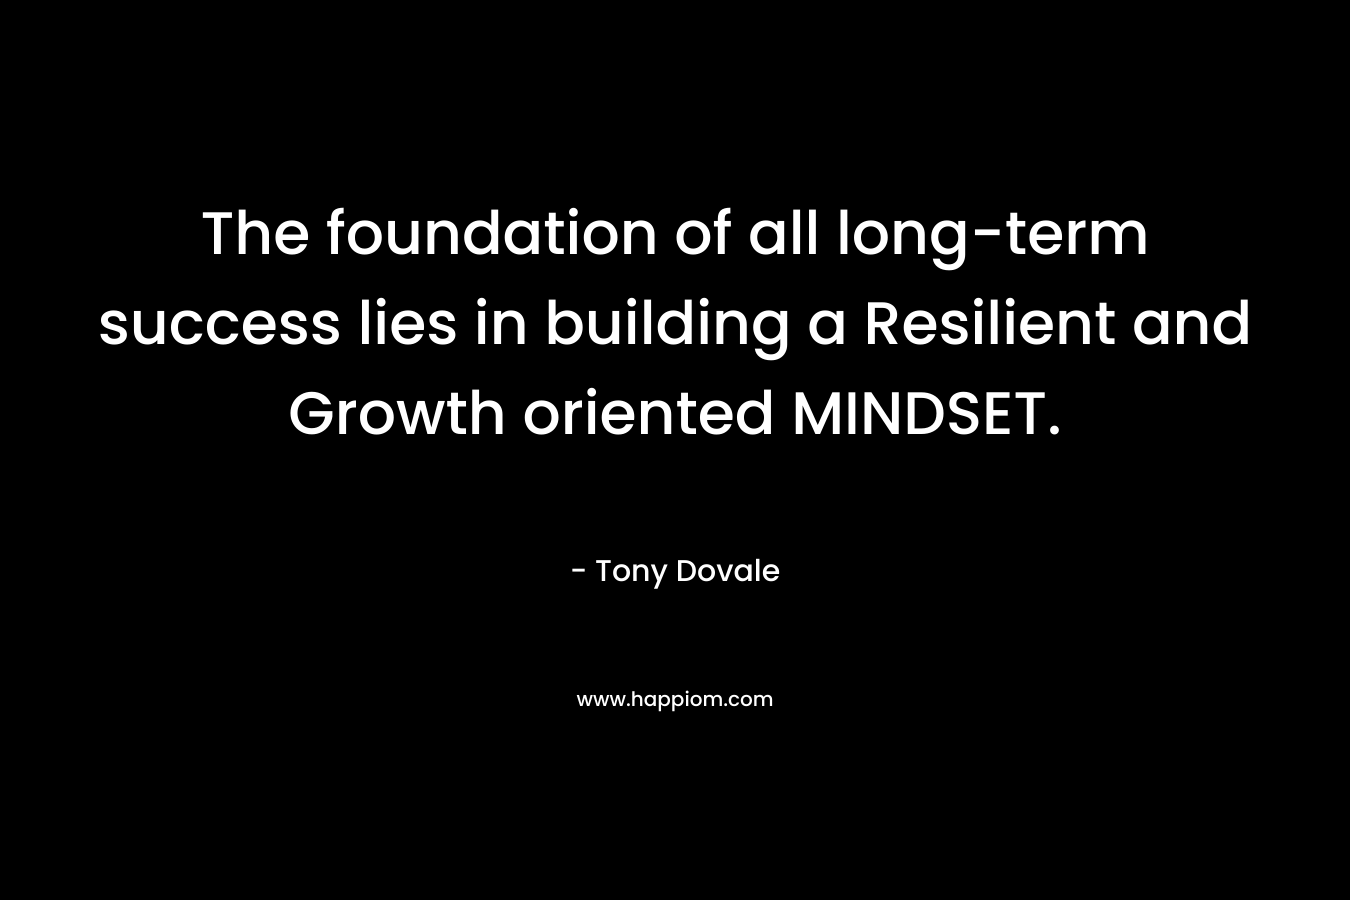 The foundation of all long-term success lies in building a Resilient and Growth oriented MINDSET. – Tony Dovale